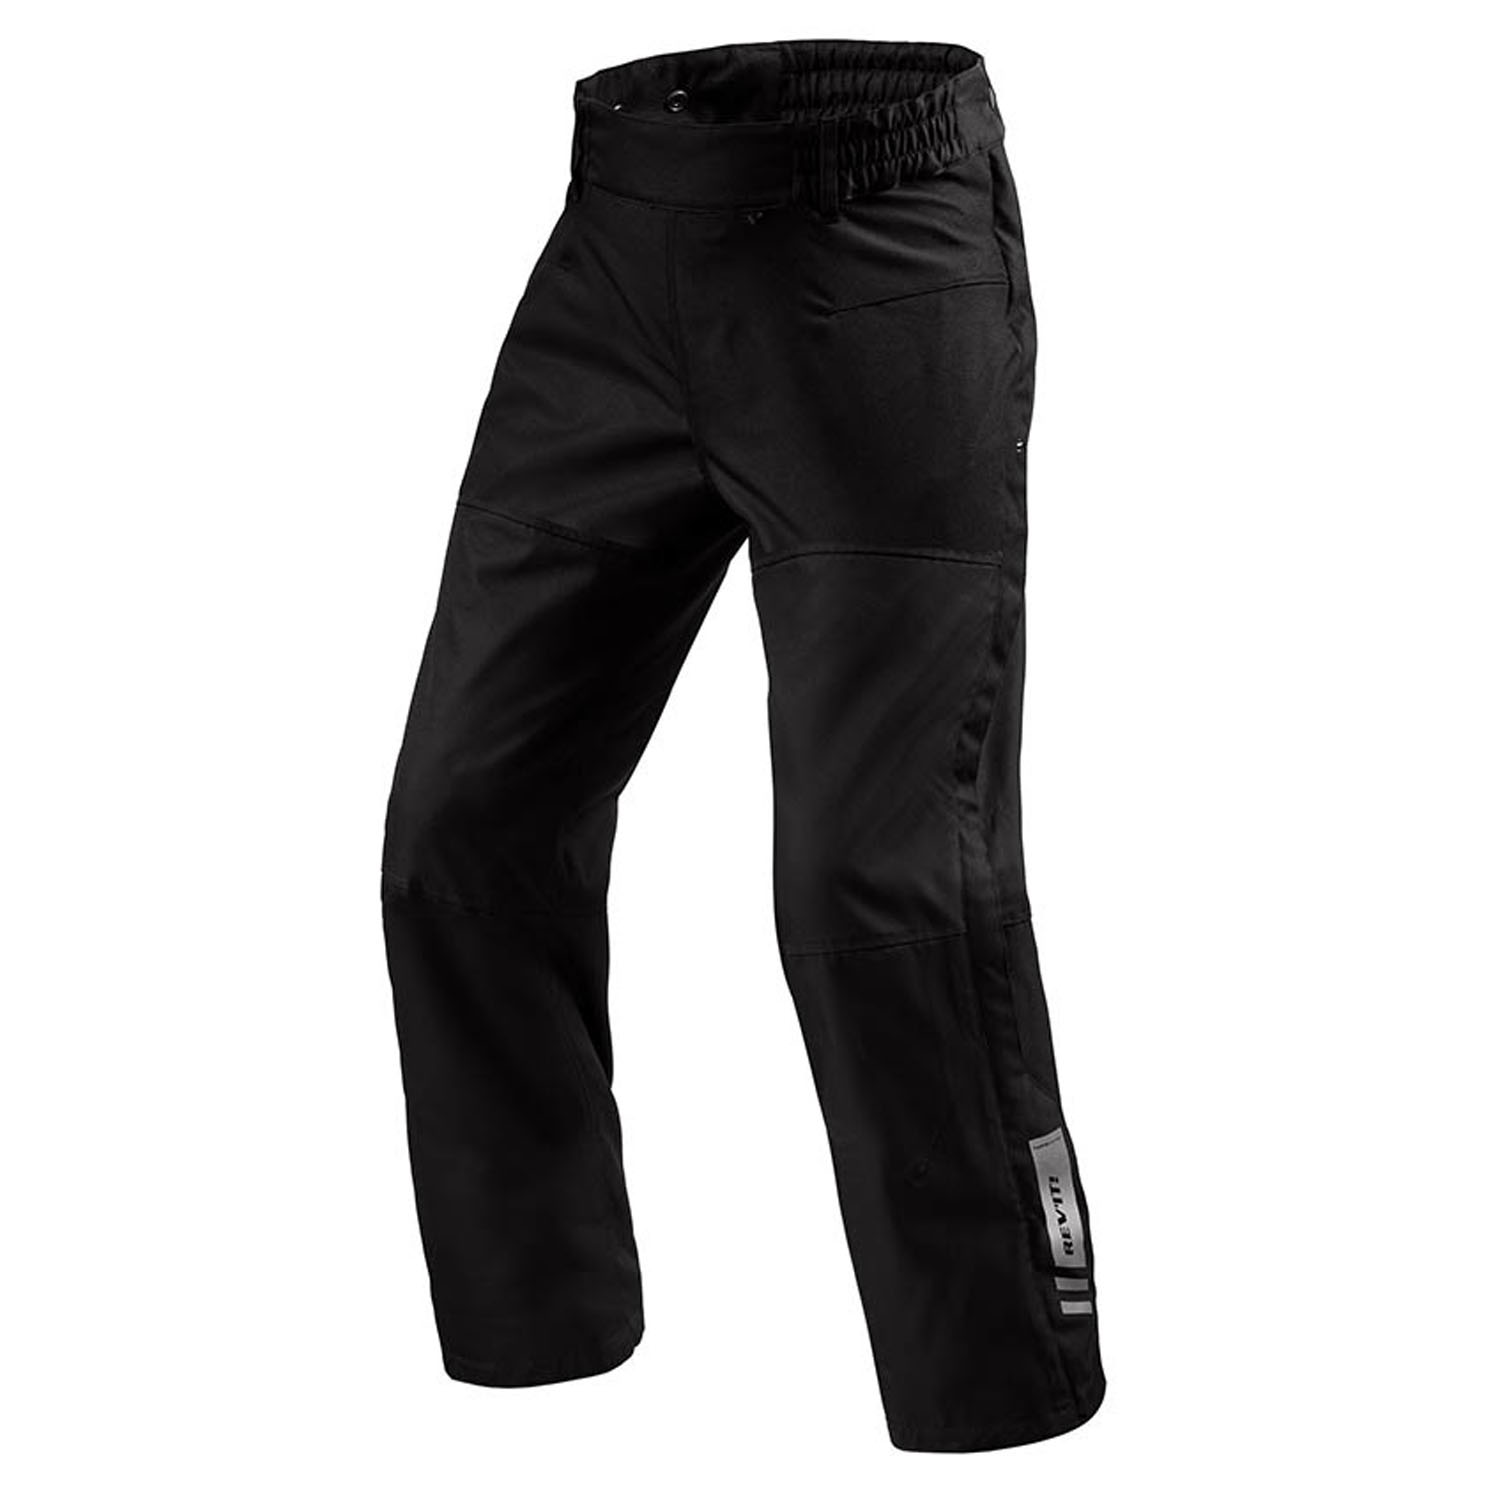 Image of REV'IT! Pants Axis 2 H2O Black Long Motorcycle Pants Taille M